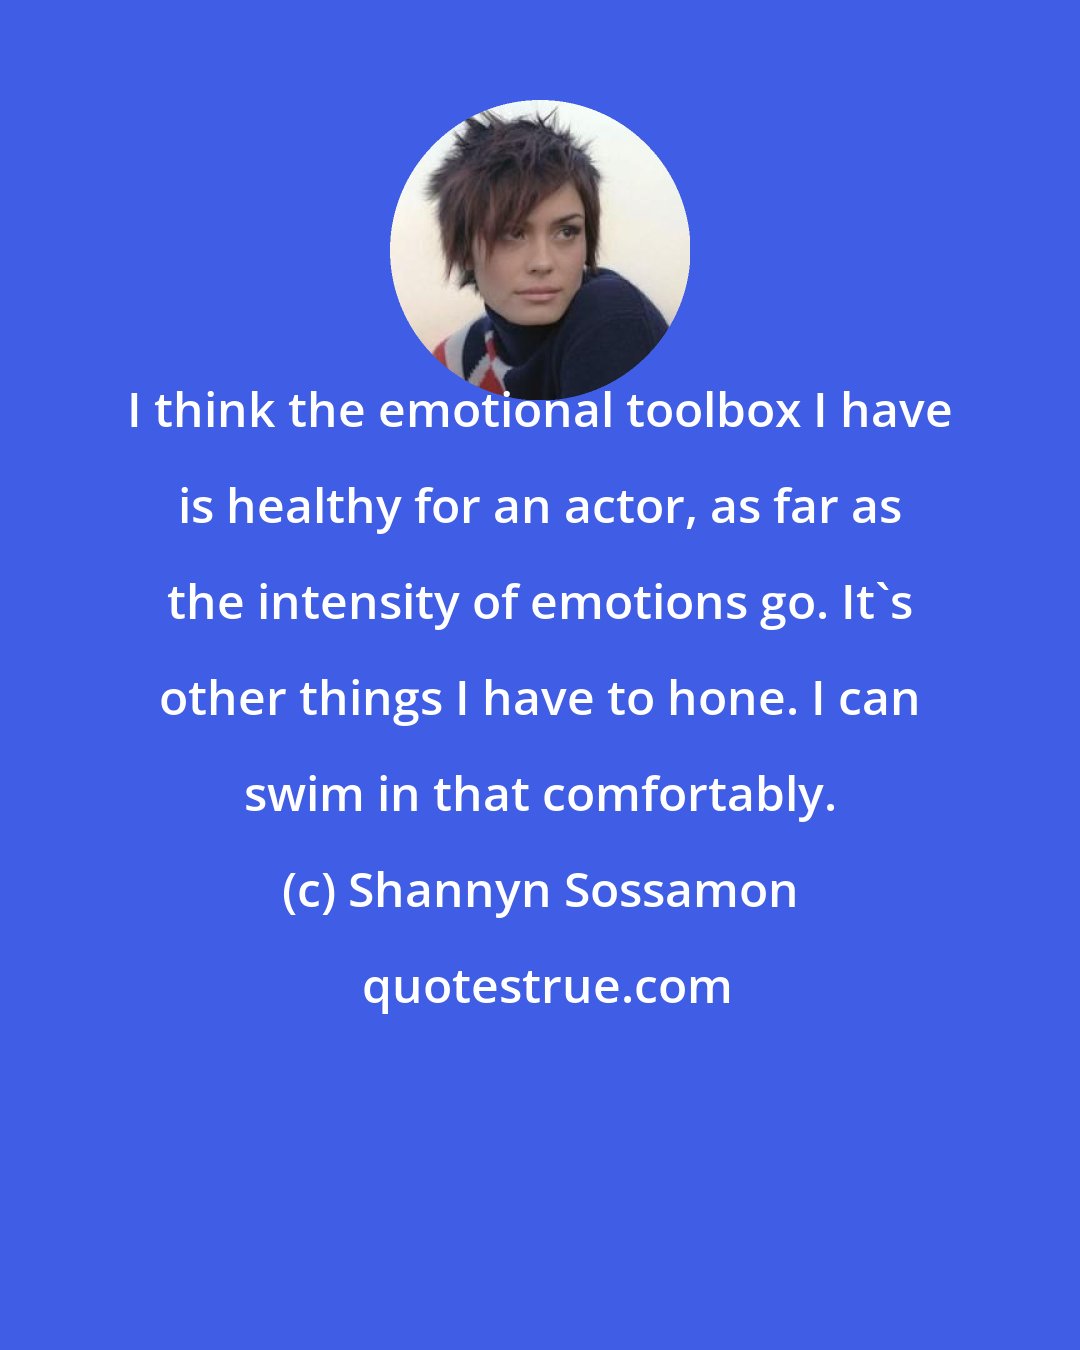 Shannyn Sossamon: I think the emotional toolbox I have is healthy for an actor, as far as the intensity of emotions go. It's other things I have to hone. I can swim in that comfortably.